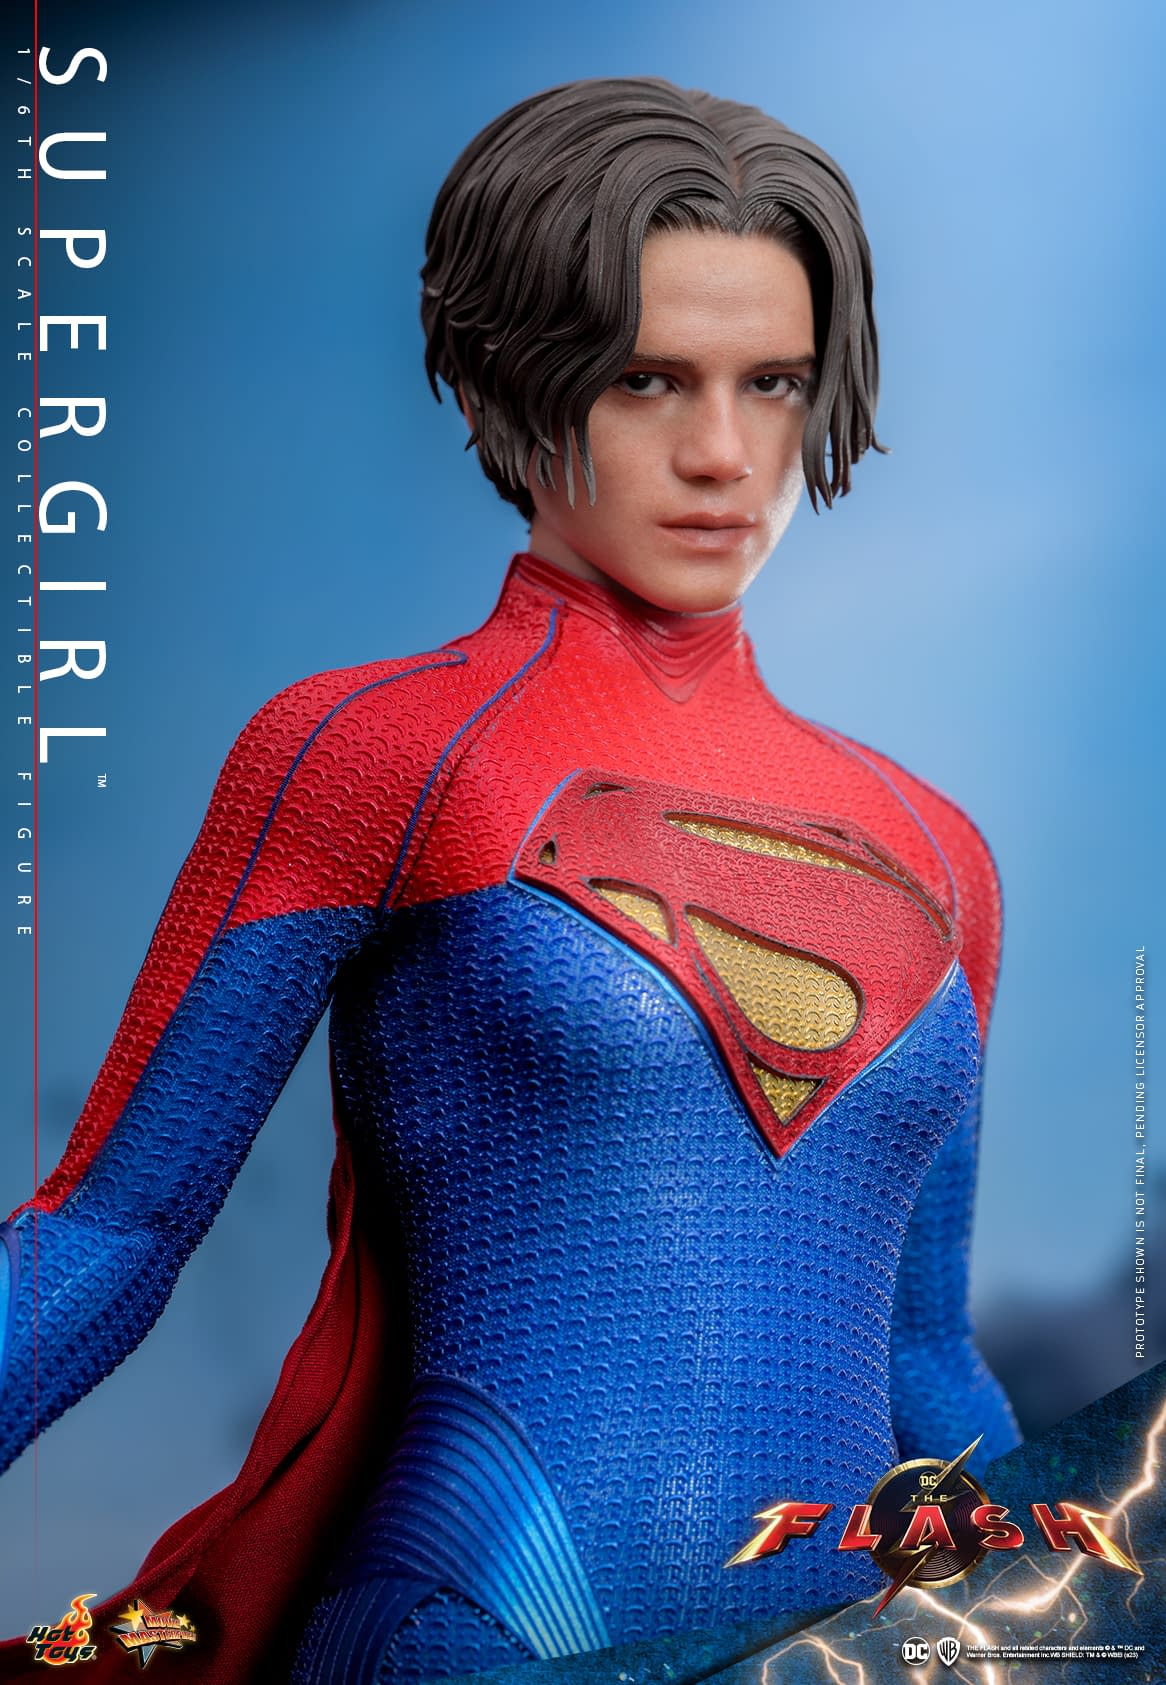 Hot Toys Reveals Its New THE FLASH Action Figure of Supergirl